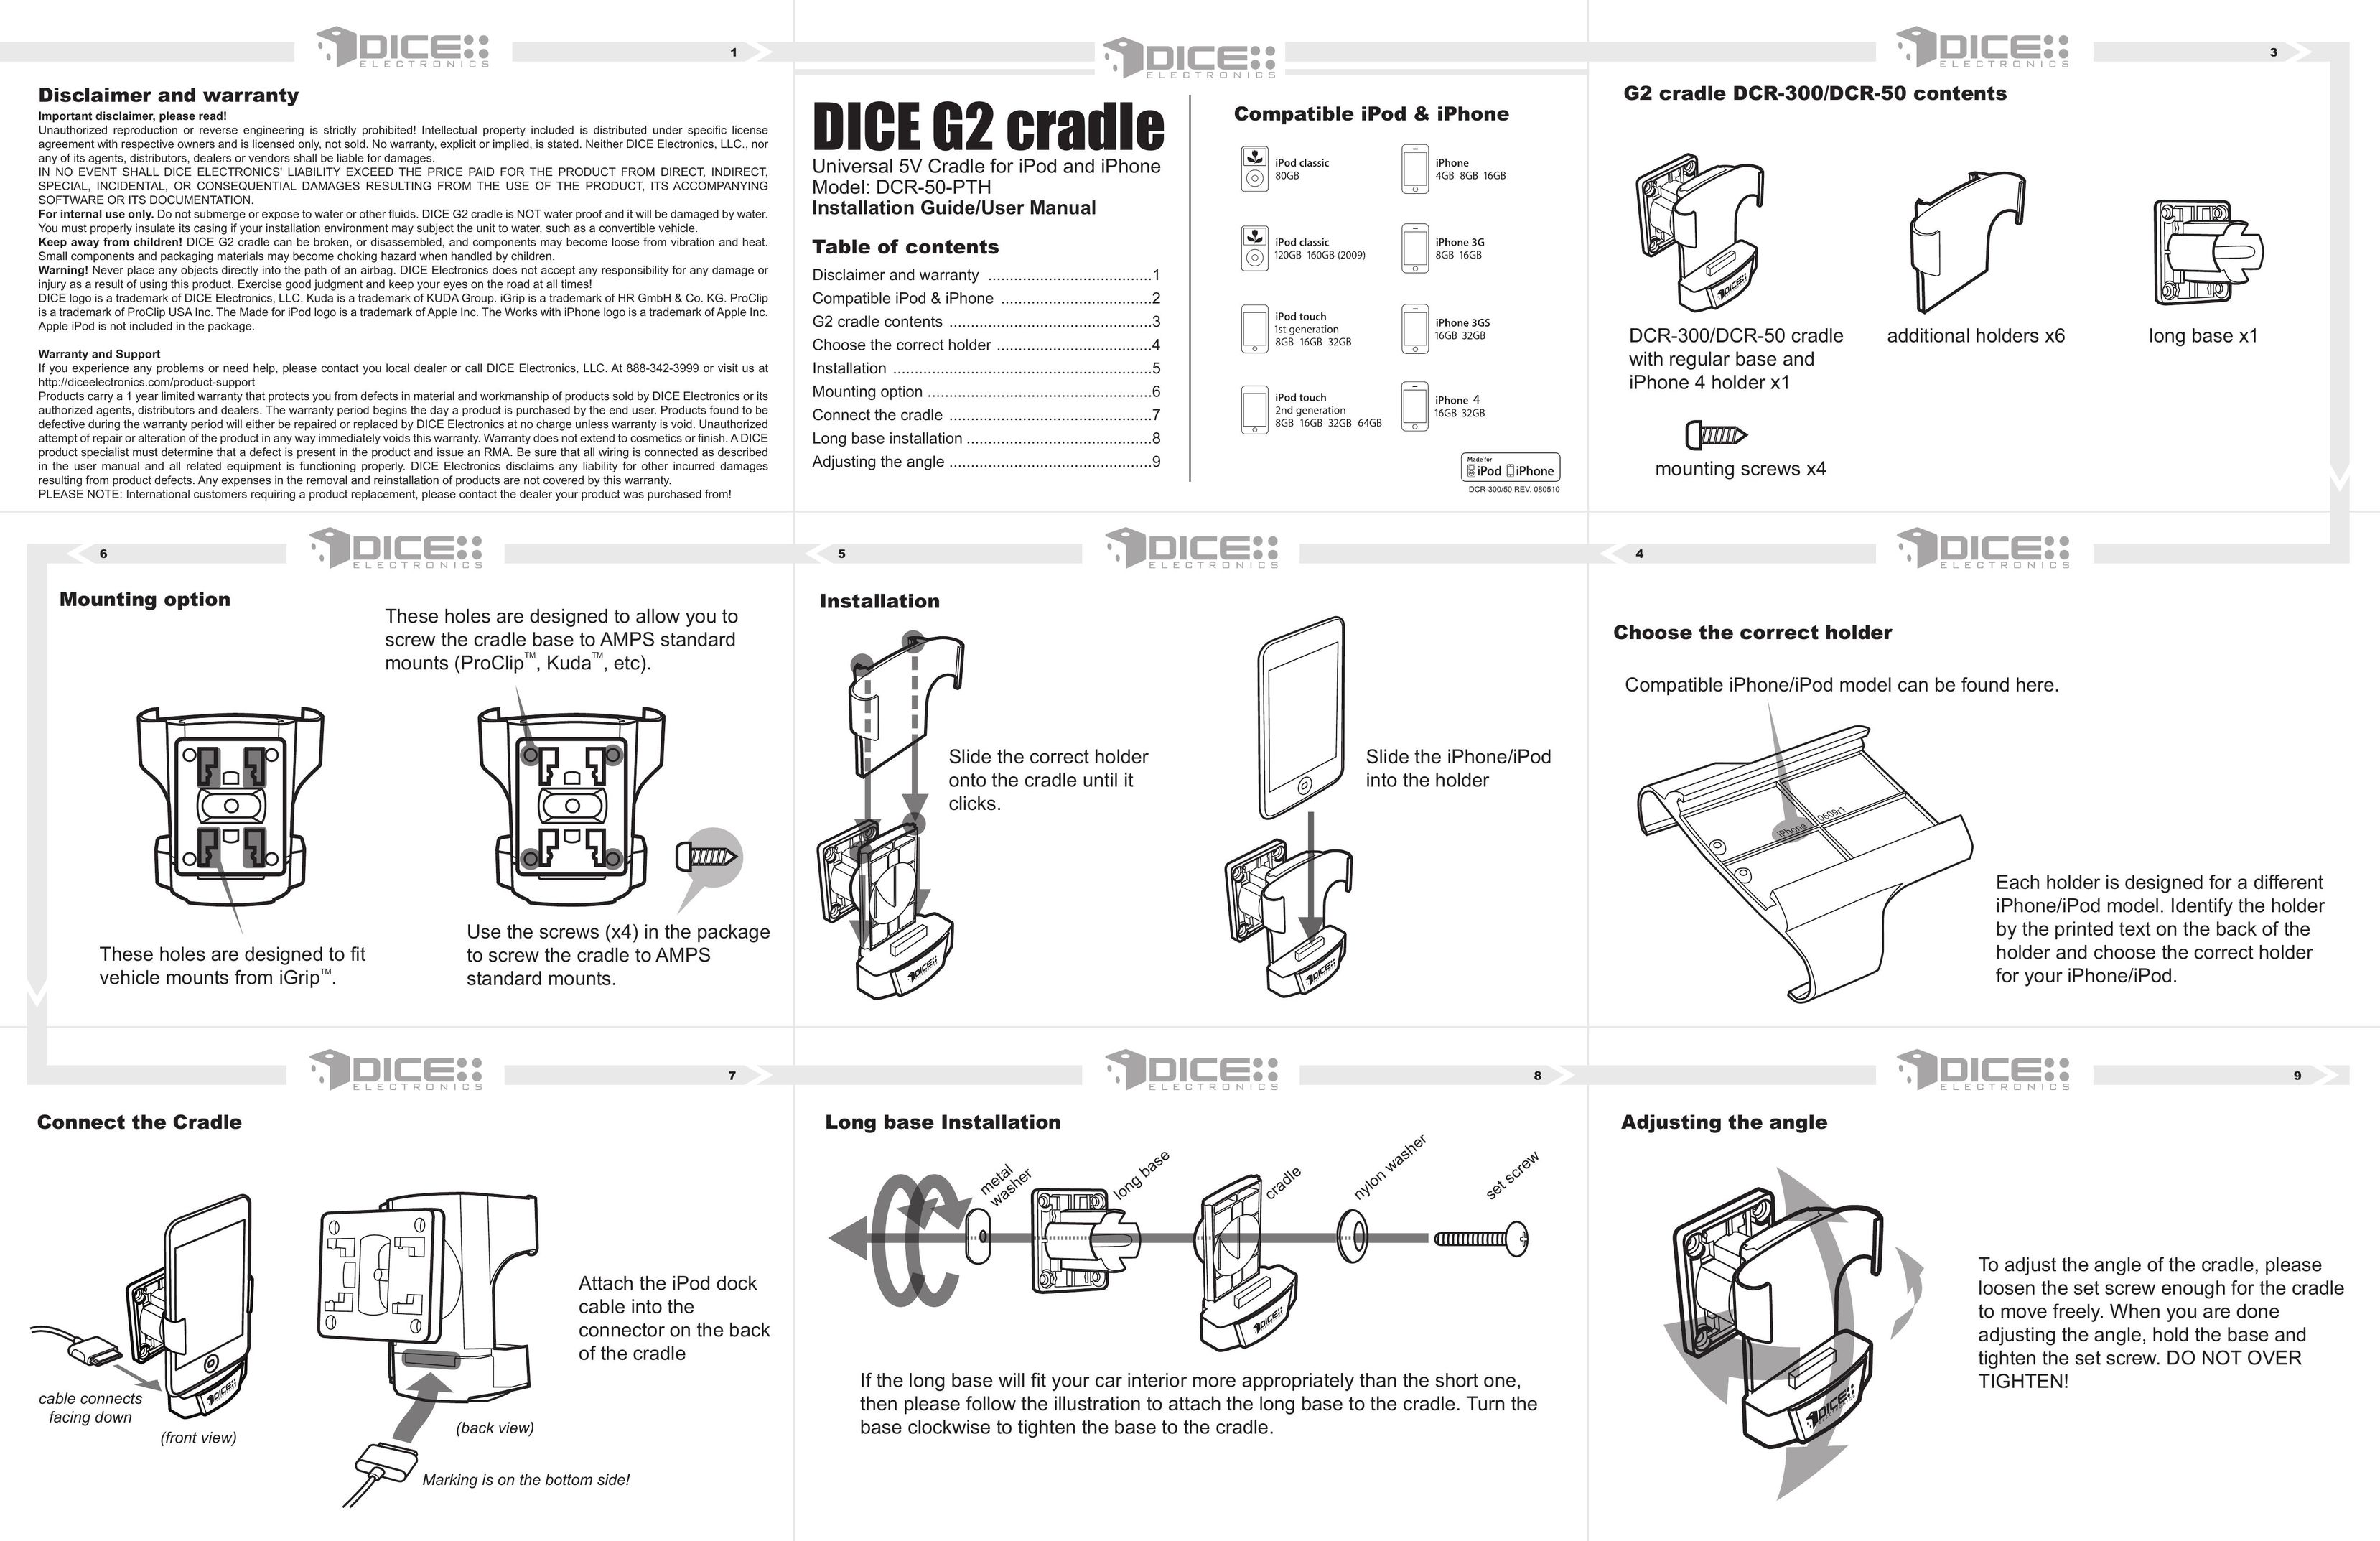 Dice electronic DCR-50 Carrying Case User Manual